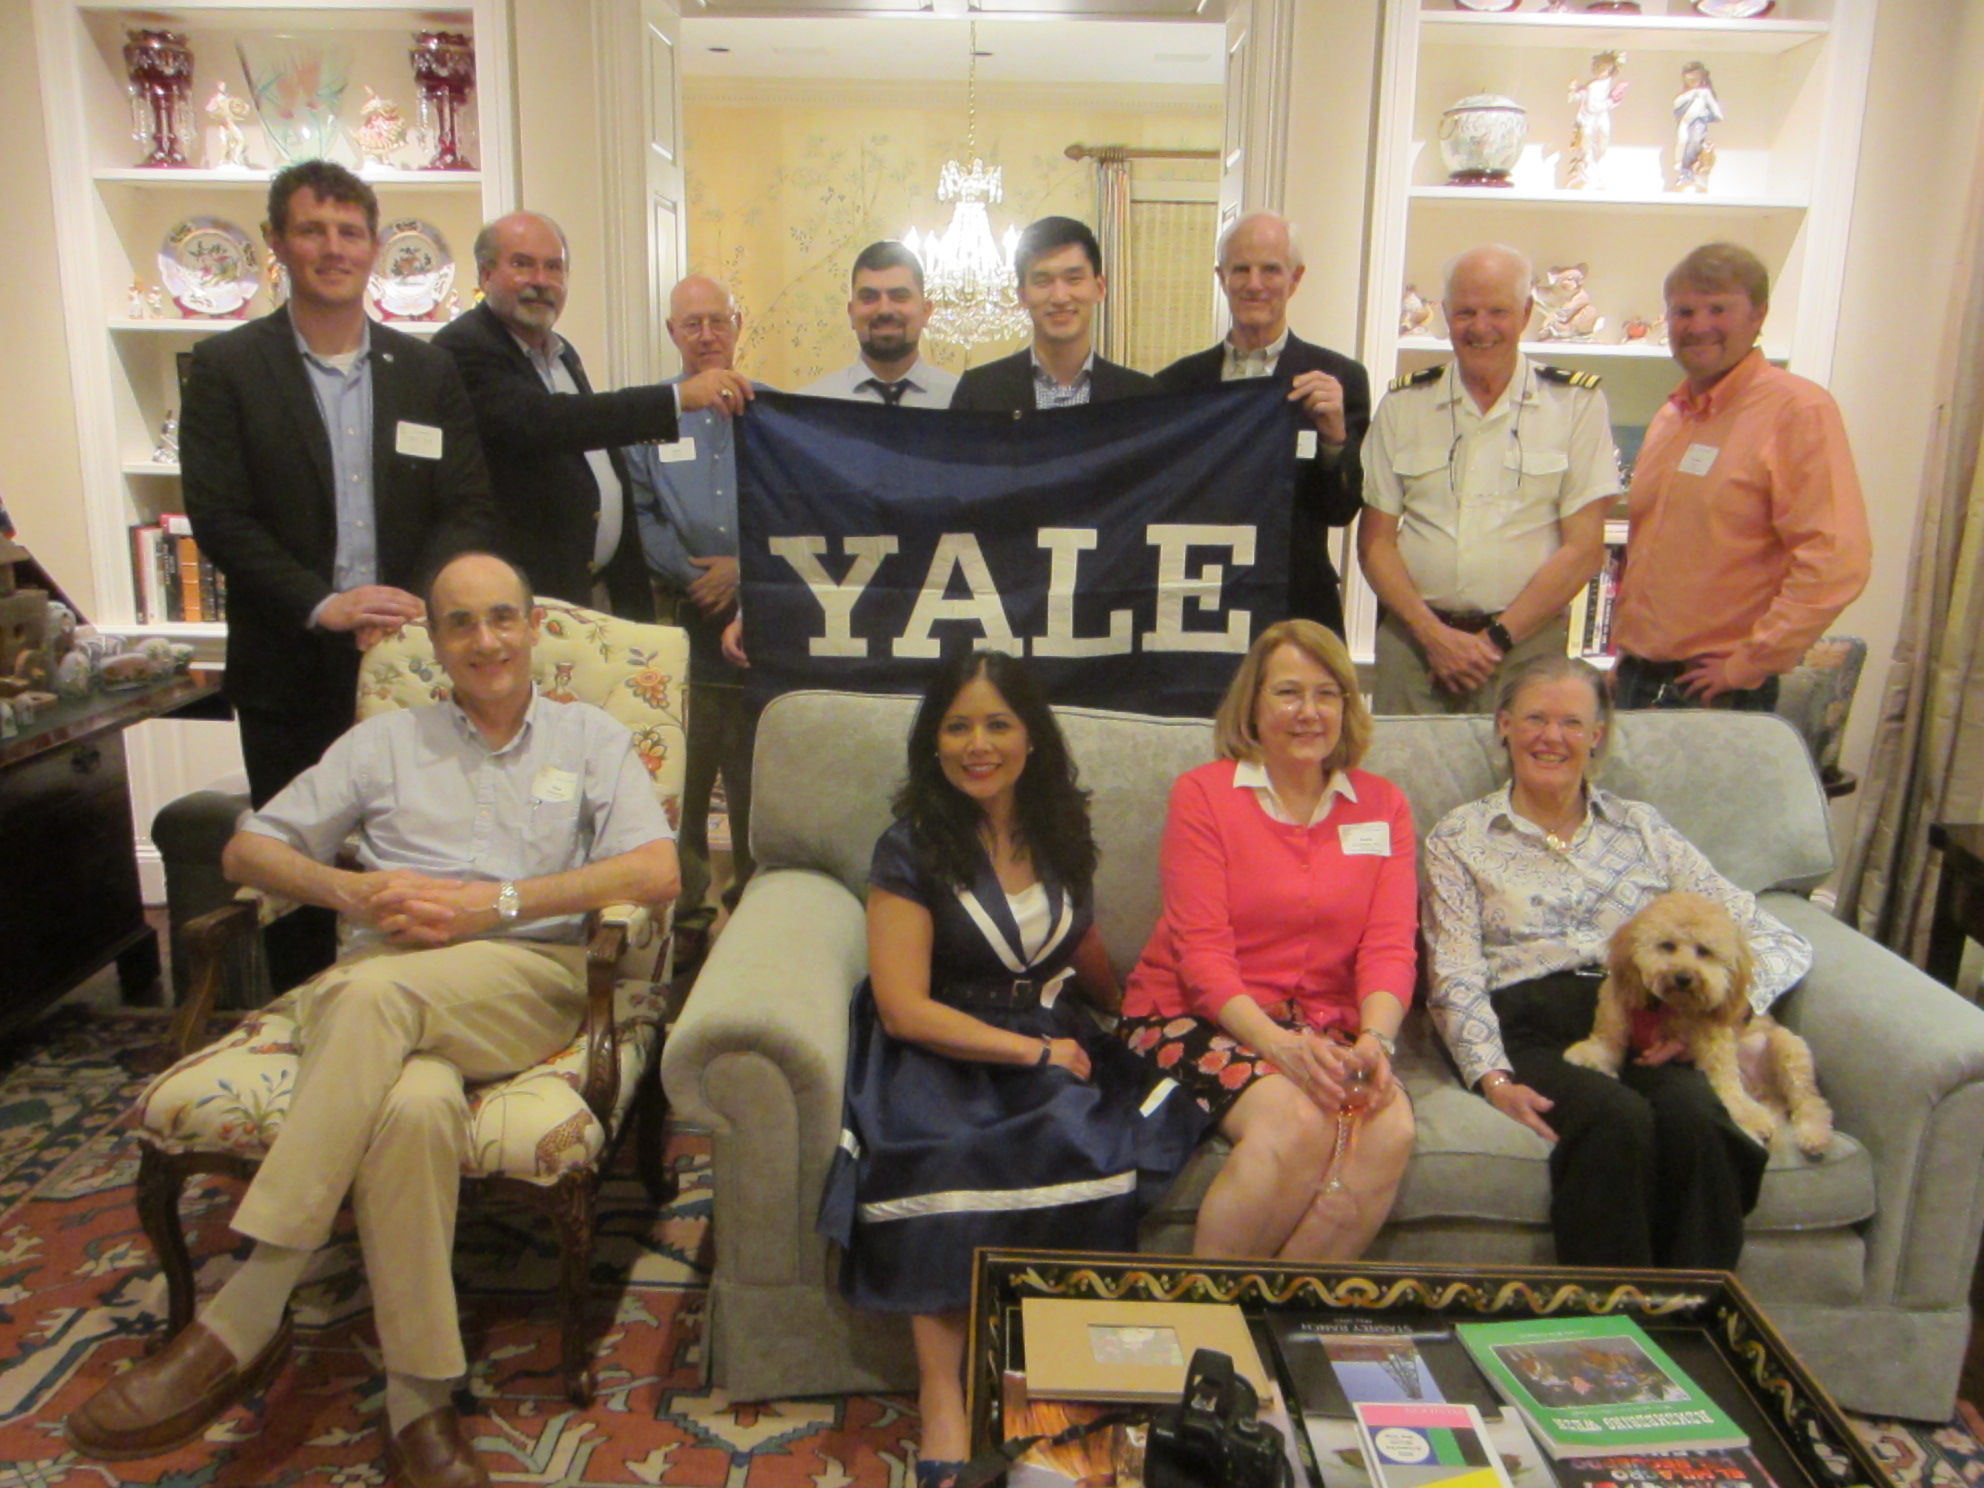 The attendees at the Yale Veterans Association alumni dinner in Houston. Photo: Henry Kwan